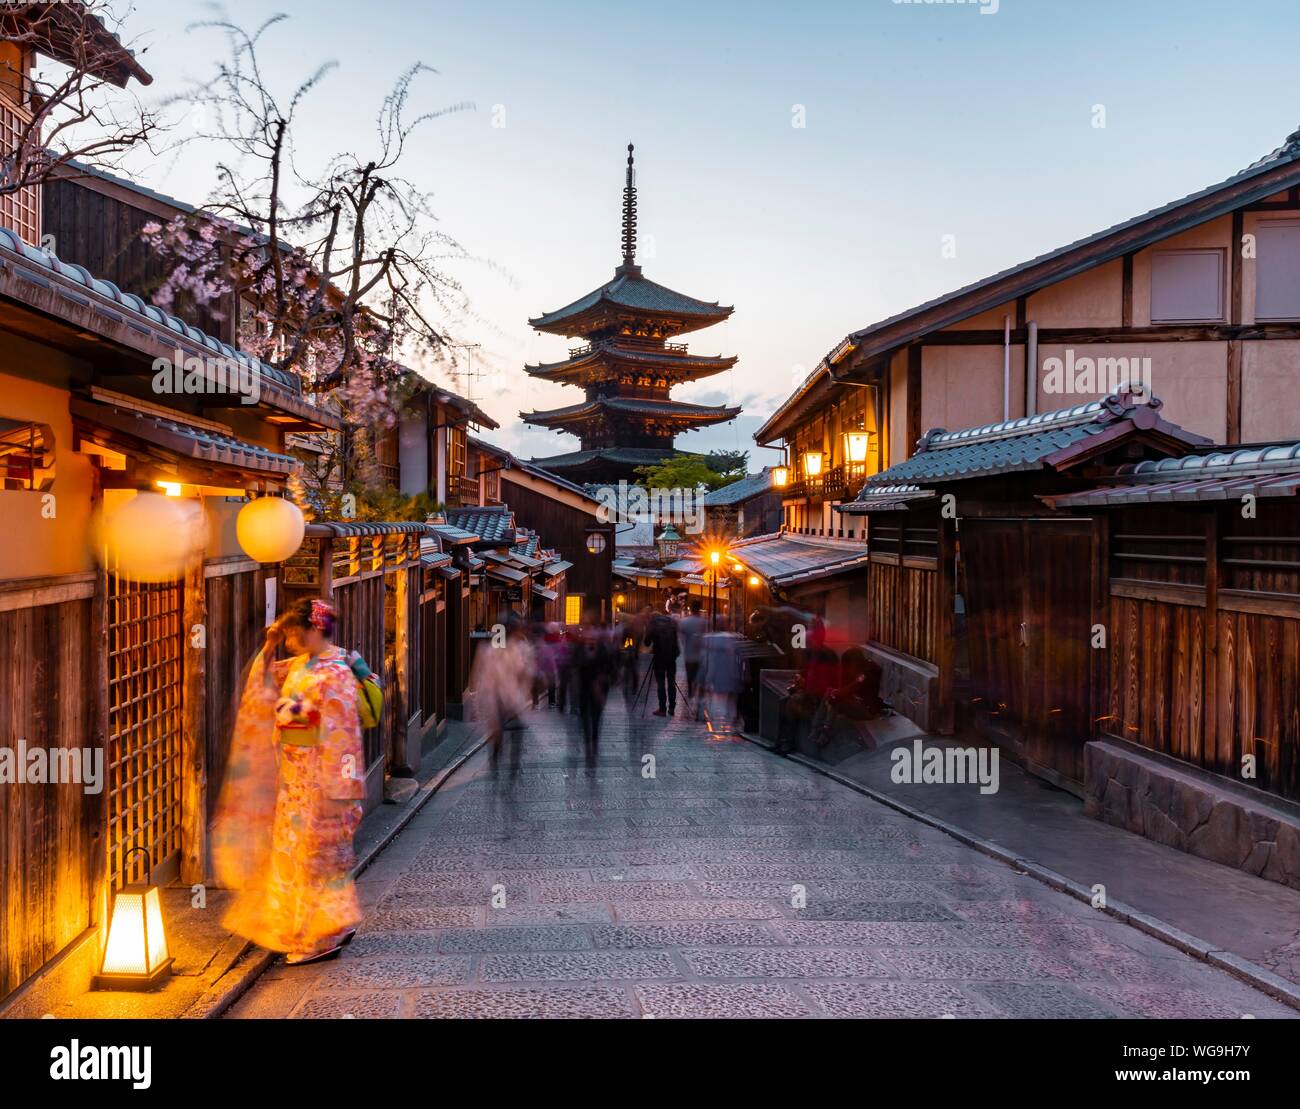 Woman in kimono and pedestrian in an alleyway, Yasaka dori historical alleyway in the old town with traditional Japanese houses, rear five-storey Stock Photo